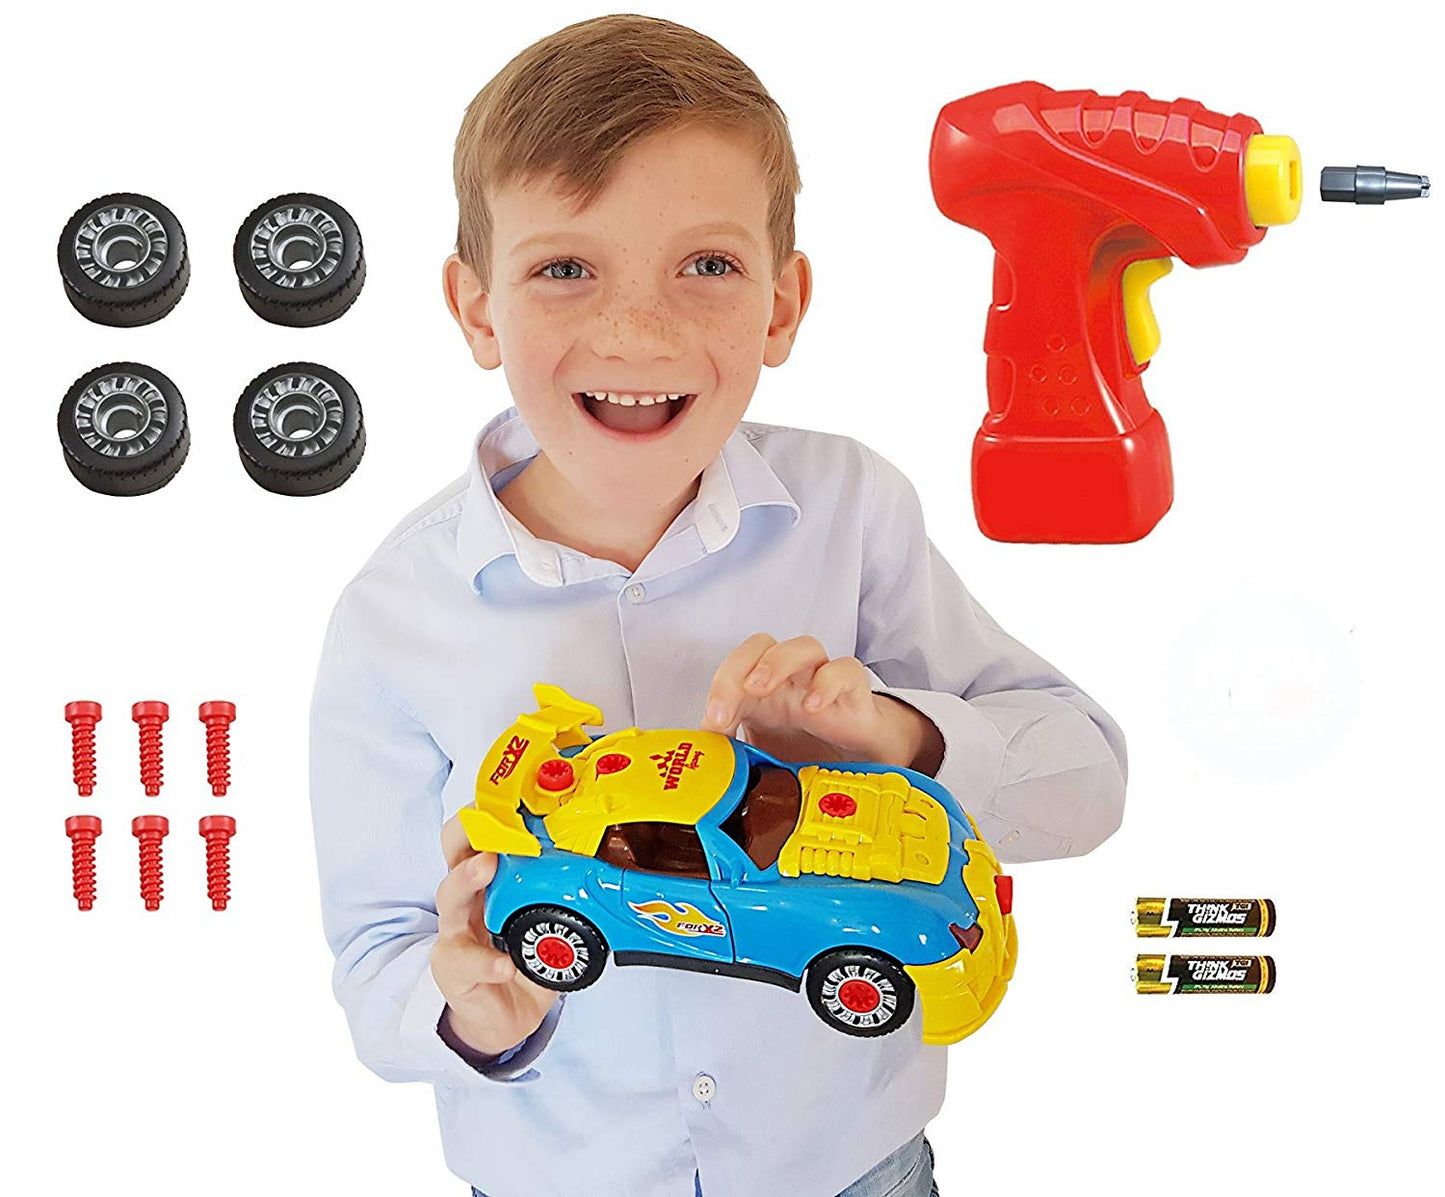 Think Gizmos Take Apart Toy Racing Car - Construction Toy Kit for Boys and Girls Aged 3 4 5 6 7 8 - Build Your Own Car Kit Updated Version 3 Exclusive to